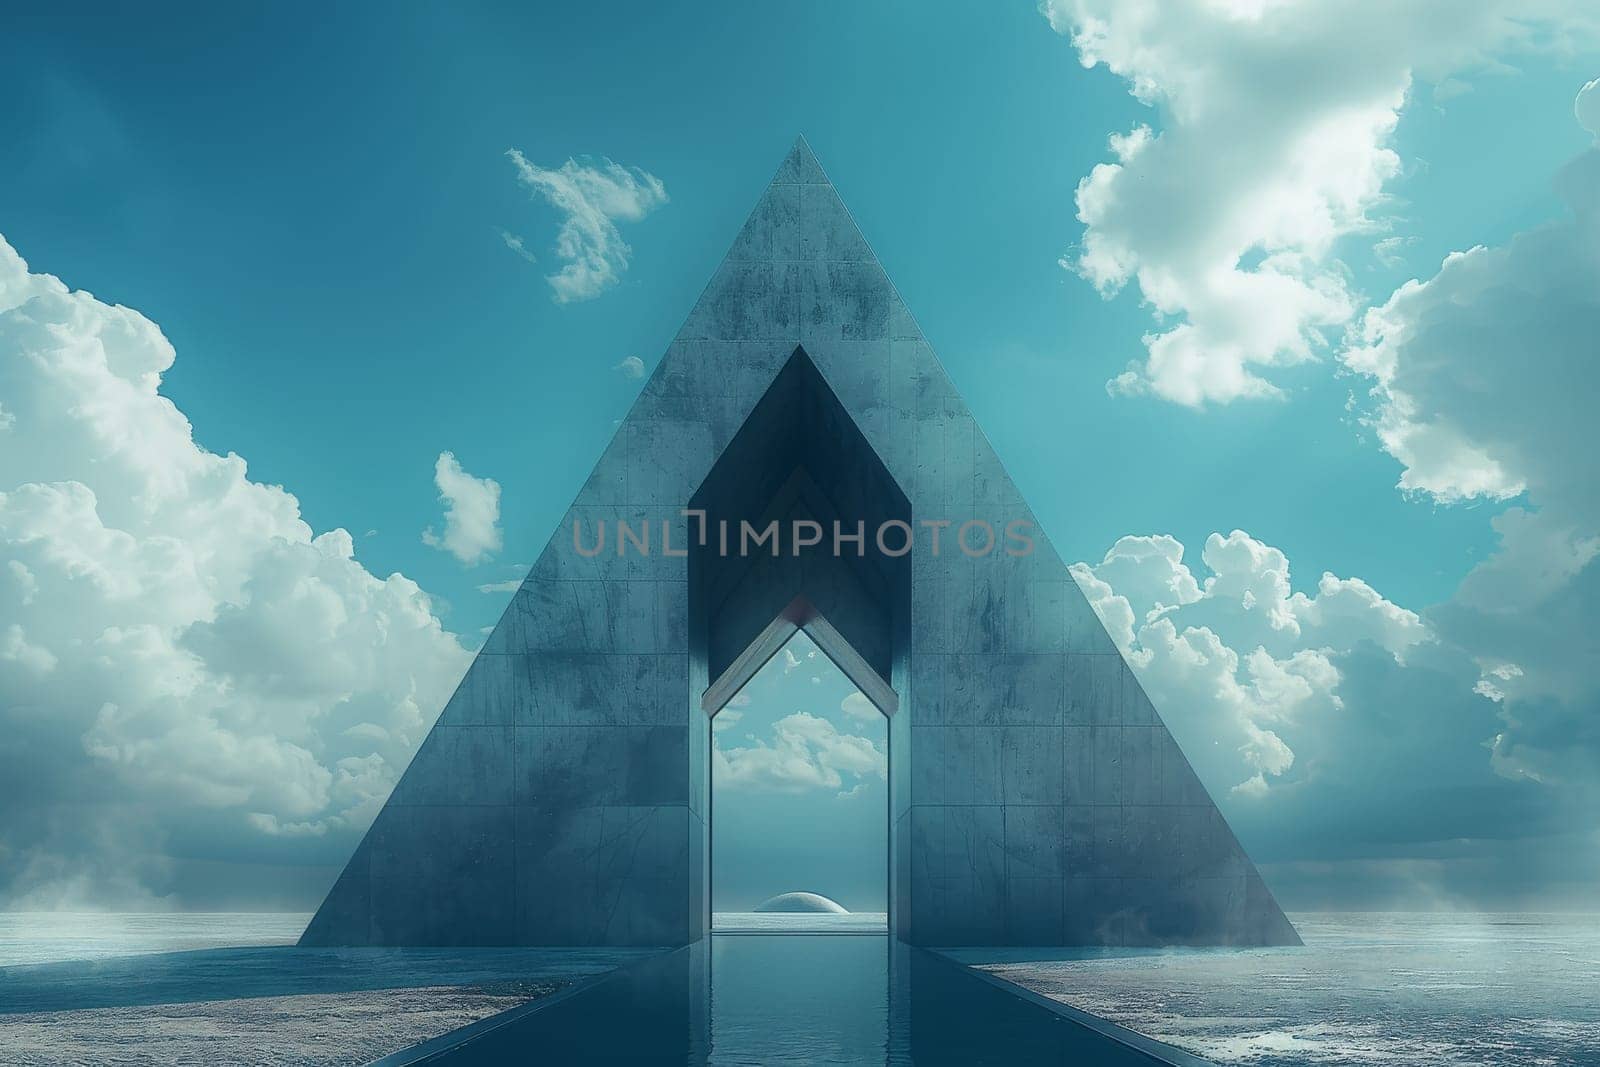 A geometric pyramid with a triangular entrance is surrounded by a cloudy sky by itchaznong